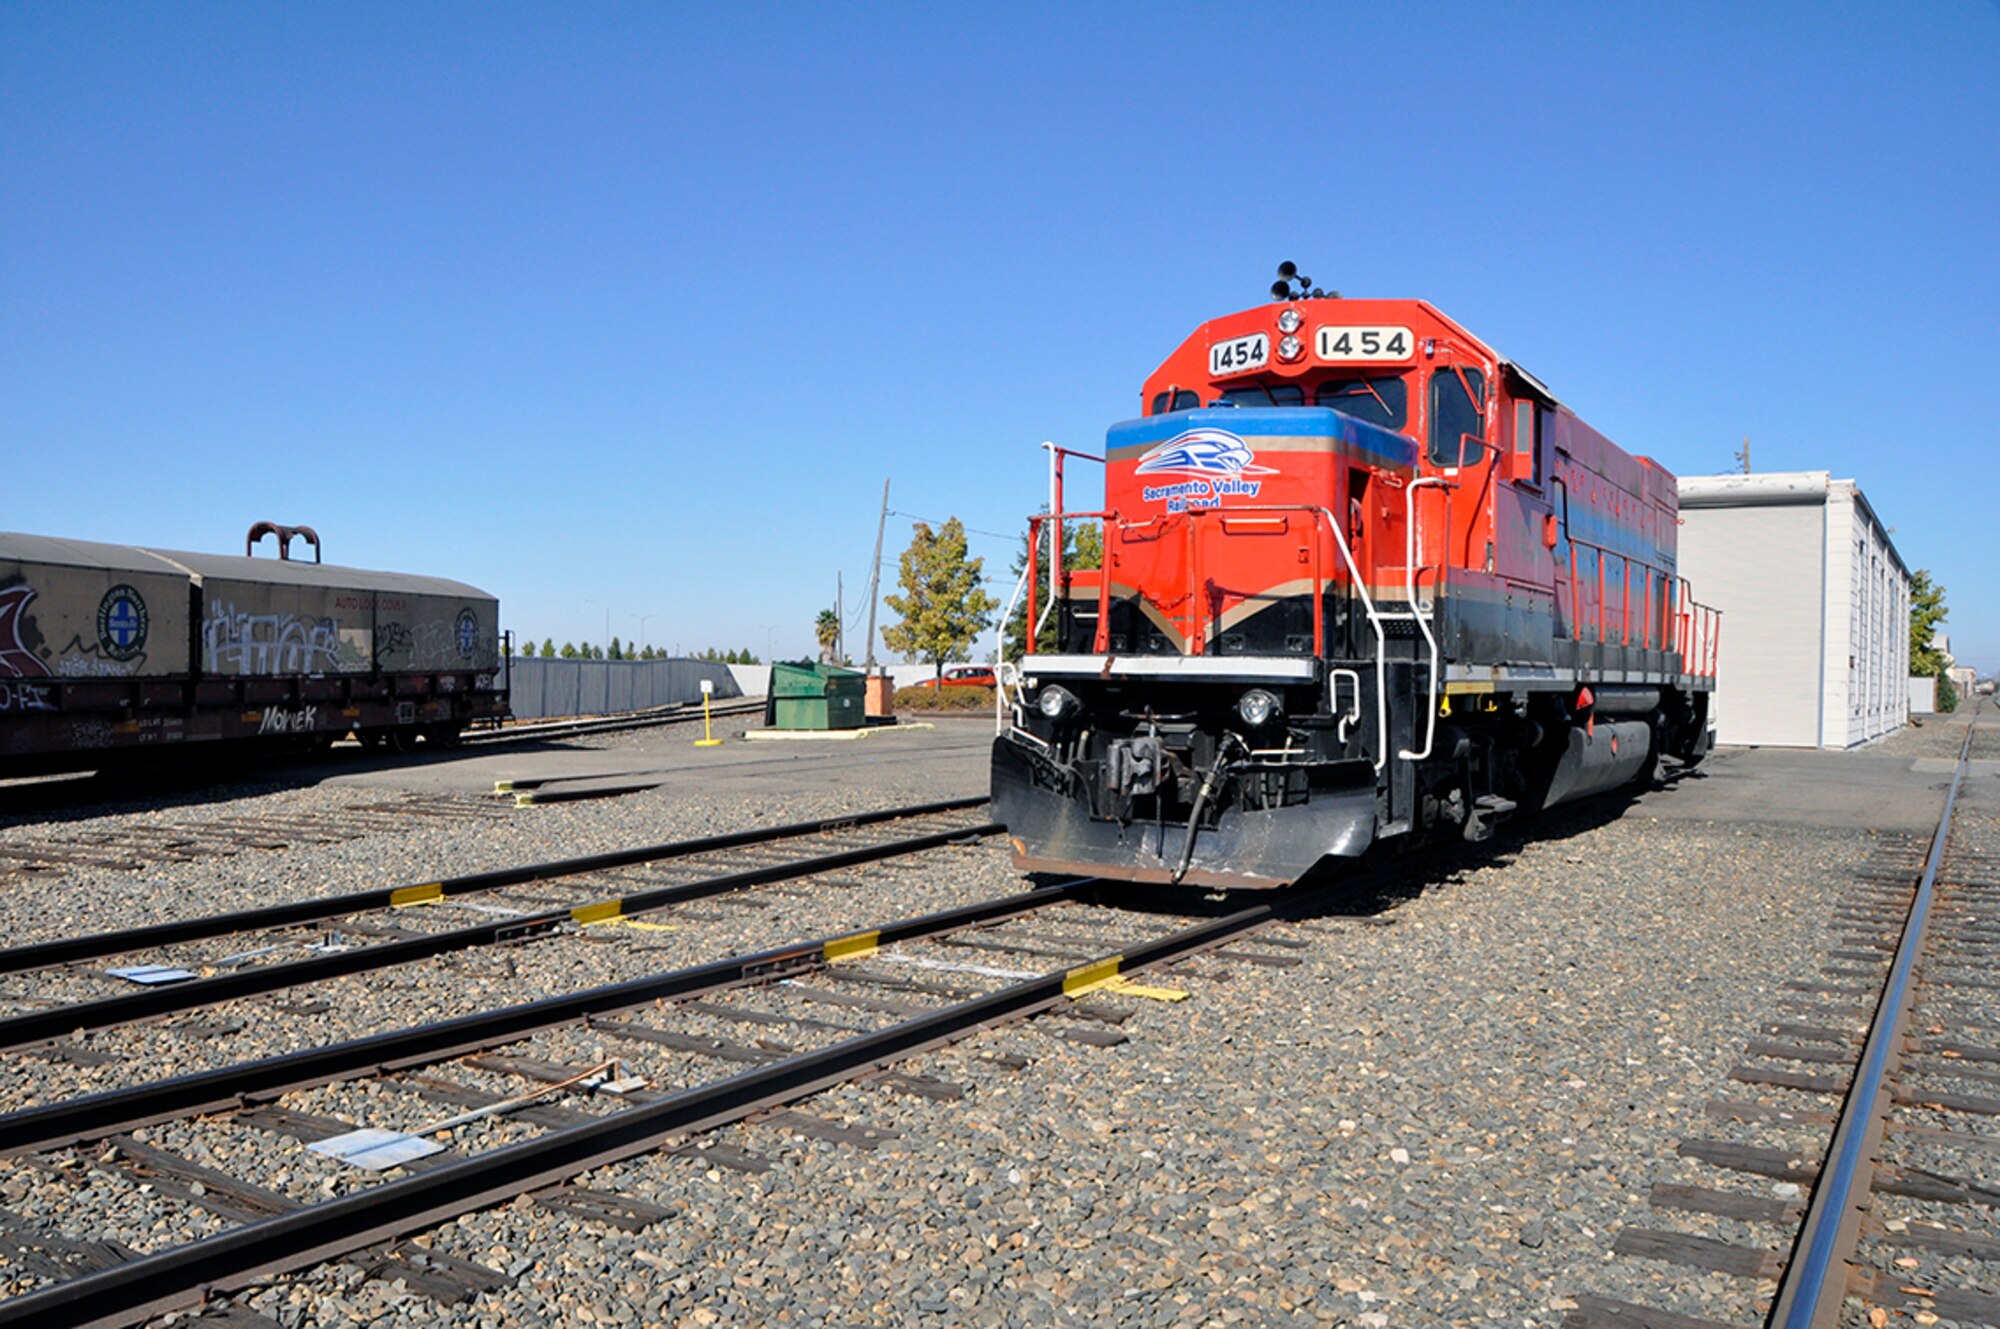 Sacramento Valley Railroad provides all railcar switching and other rail-related services on 7 miles of rail line within what is now McClellan Business Park in Sacramento, Calif., Oct. 18, 2018. (U.S. Air Force photo by Scott Johnston).